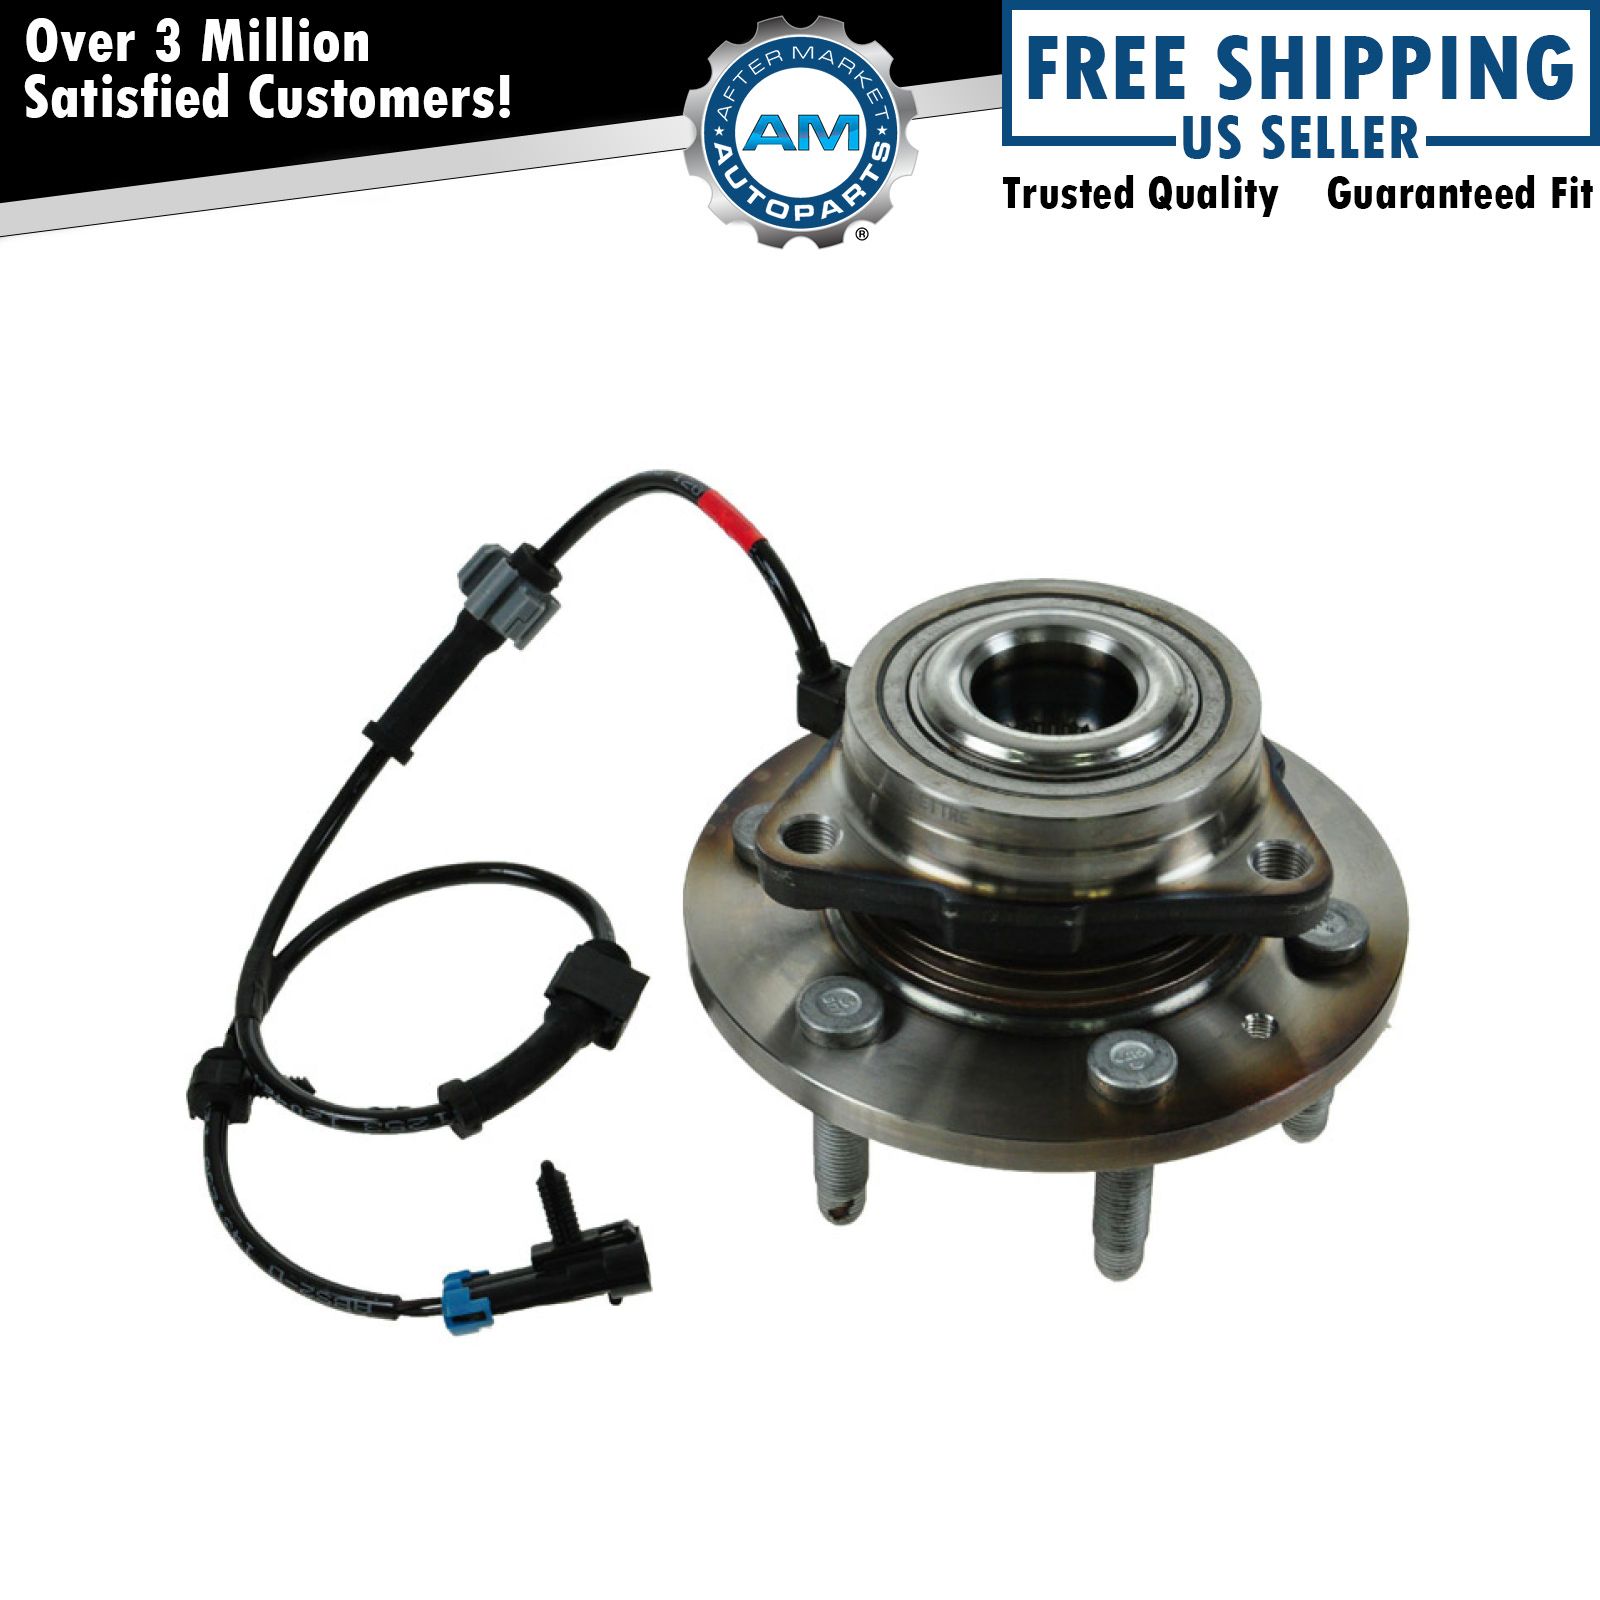 TIMKEN SP500300 Front Wheel Hub & Bearing for Chevy GMC Pickup Truck 4x4 4WD